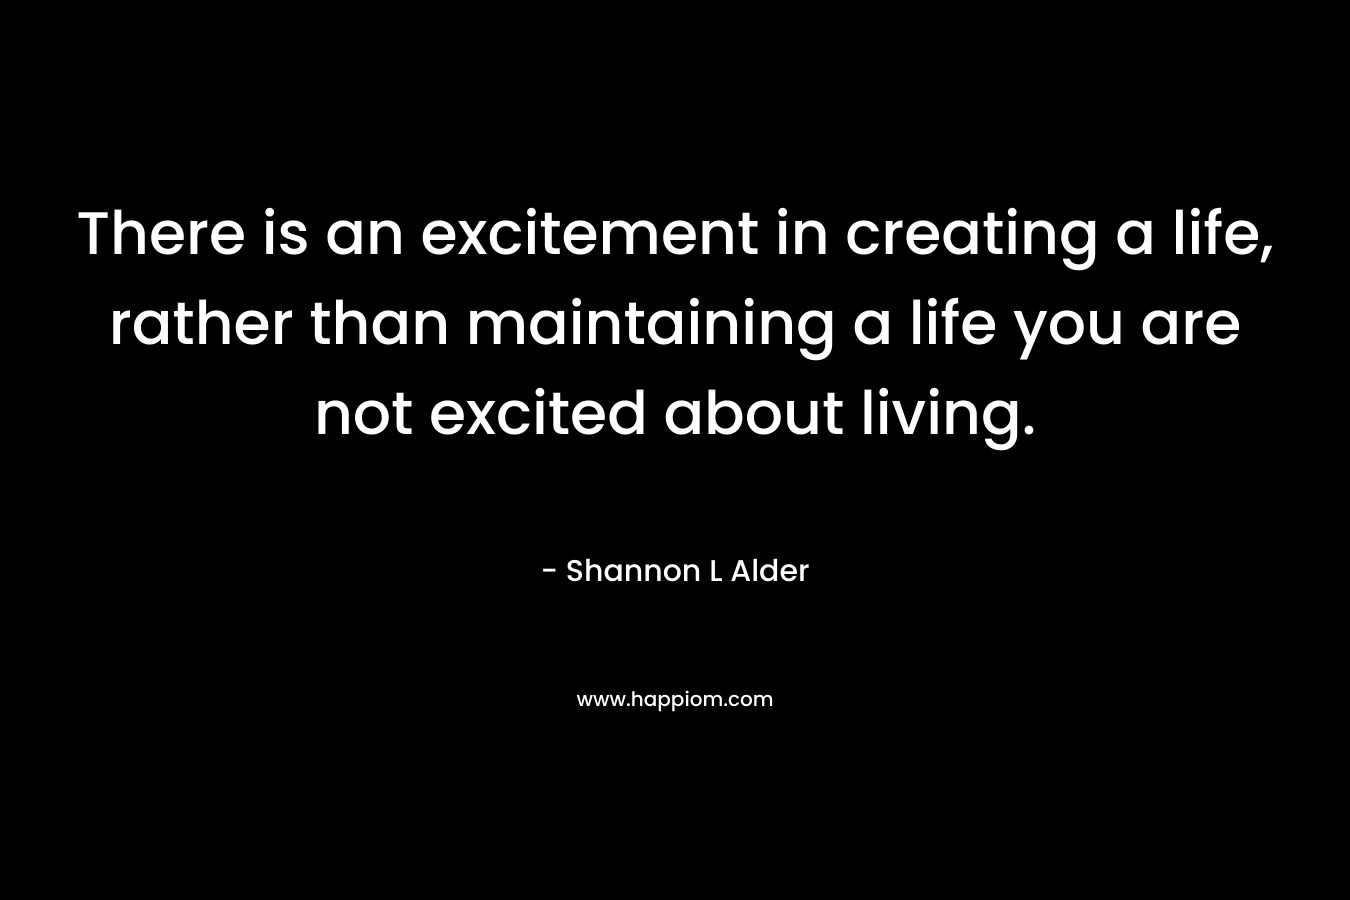 There is an excitement in creating a life, rather than maintaining a life you are not excited about living.